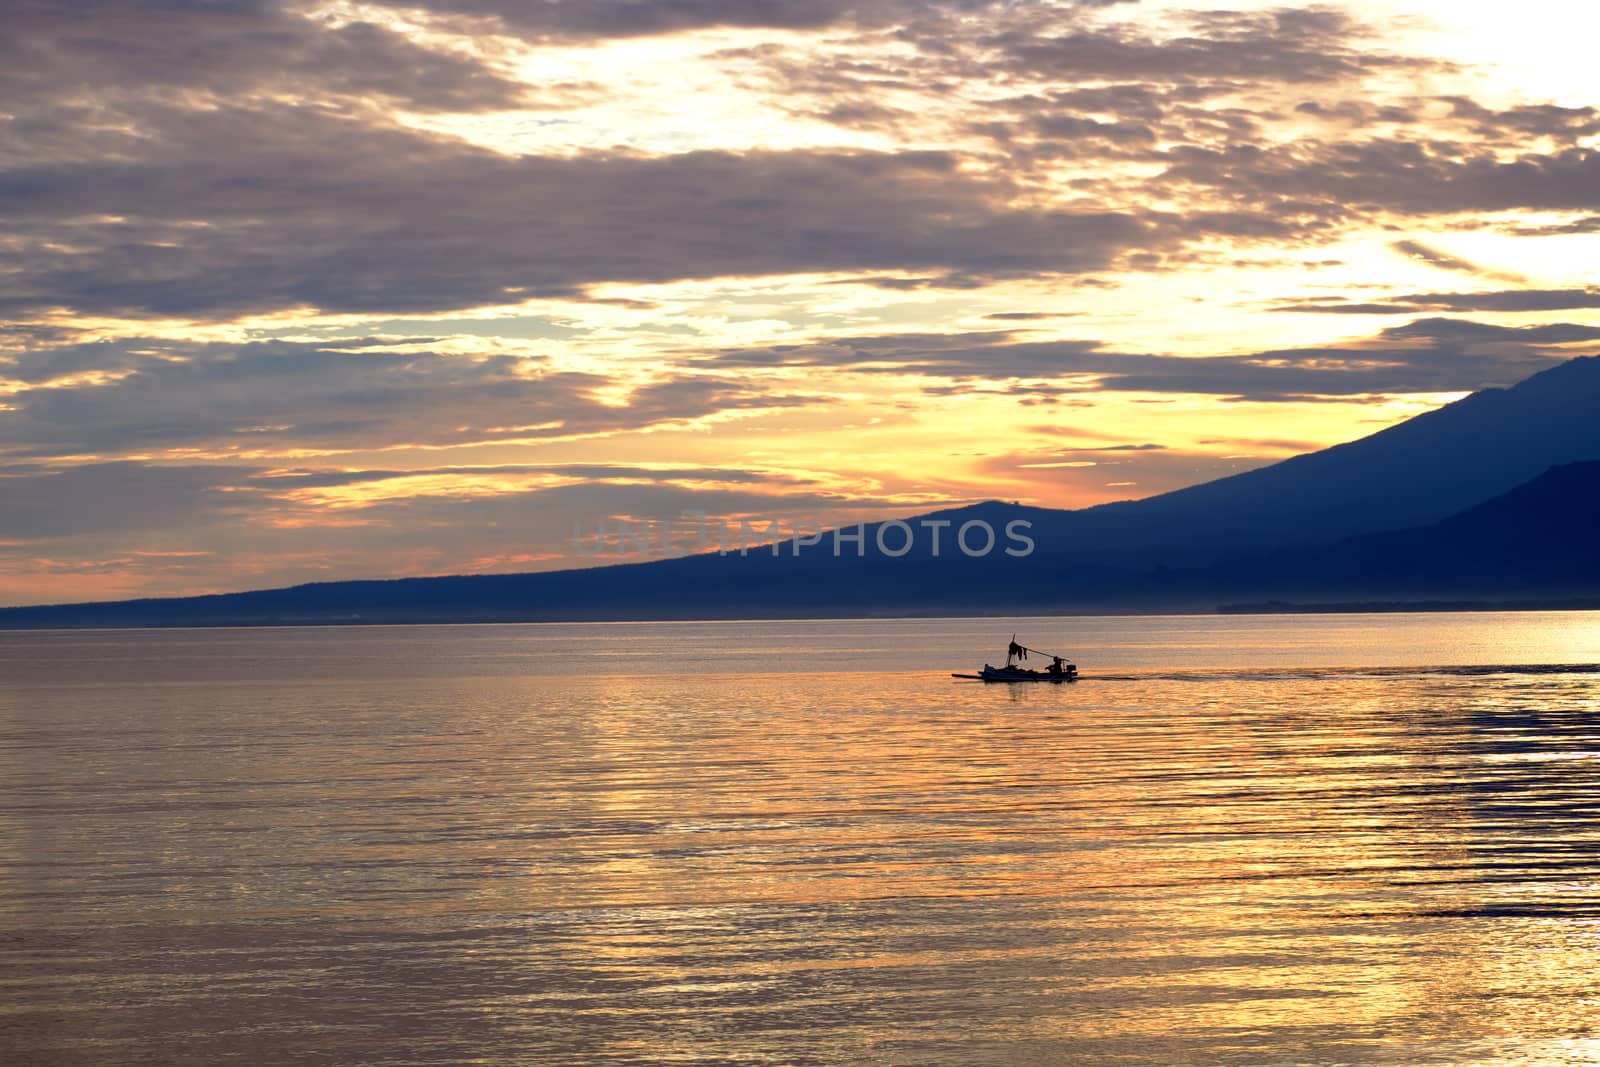 Fisherman boat with lombok volcano Rinjani in the background before the sunrise